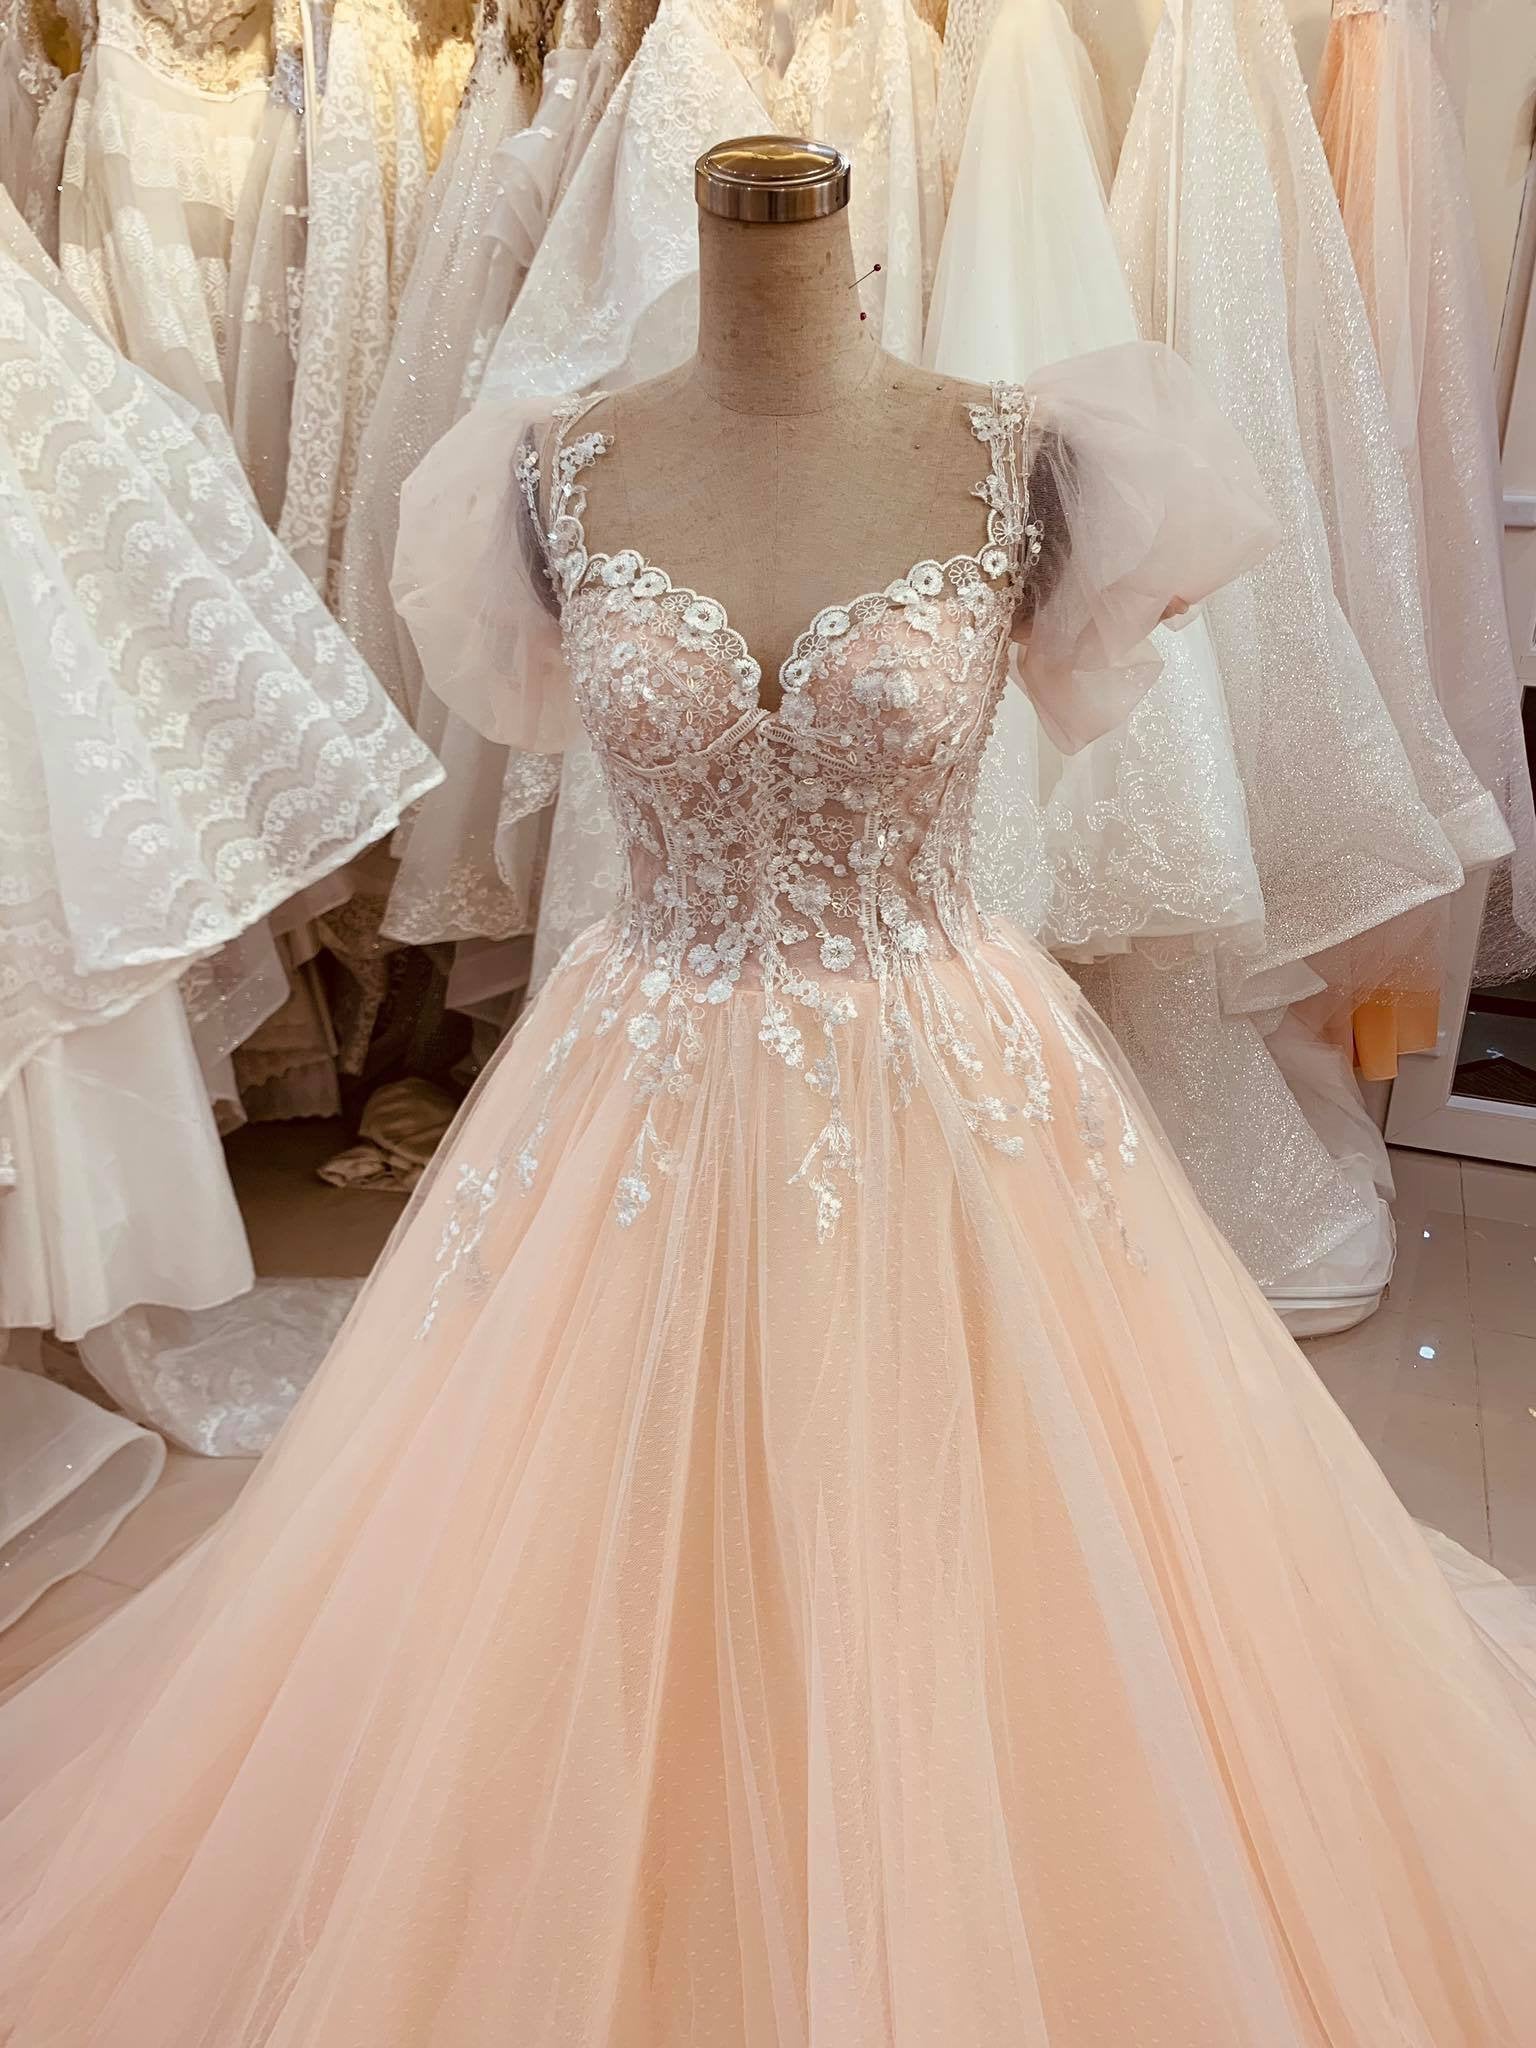 Pastel nude orange lace wedding dress with puffy sleeves and court train